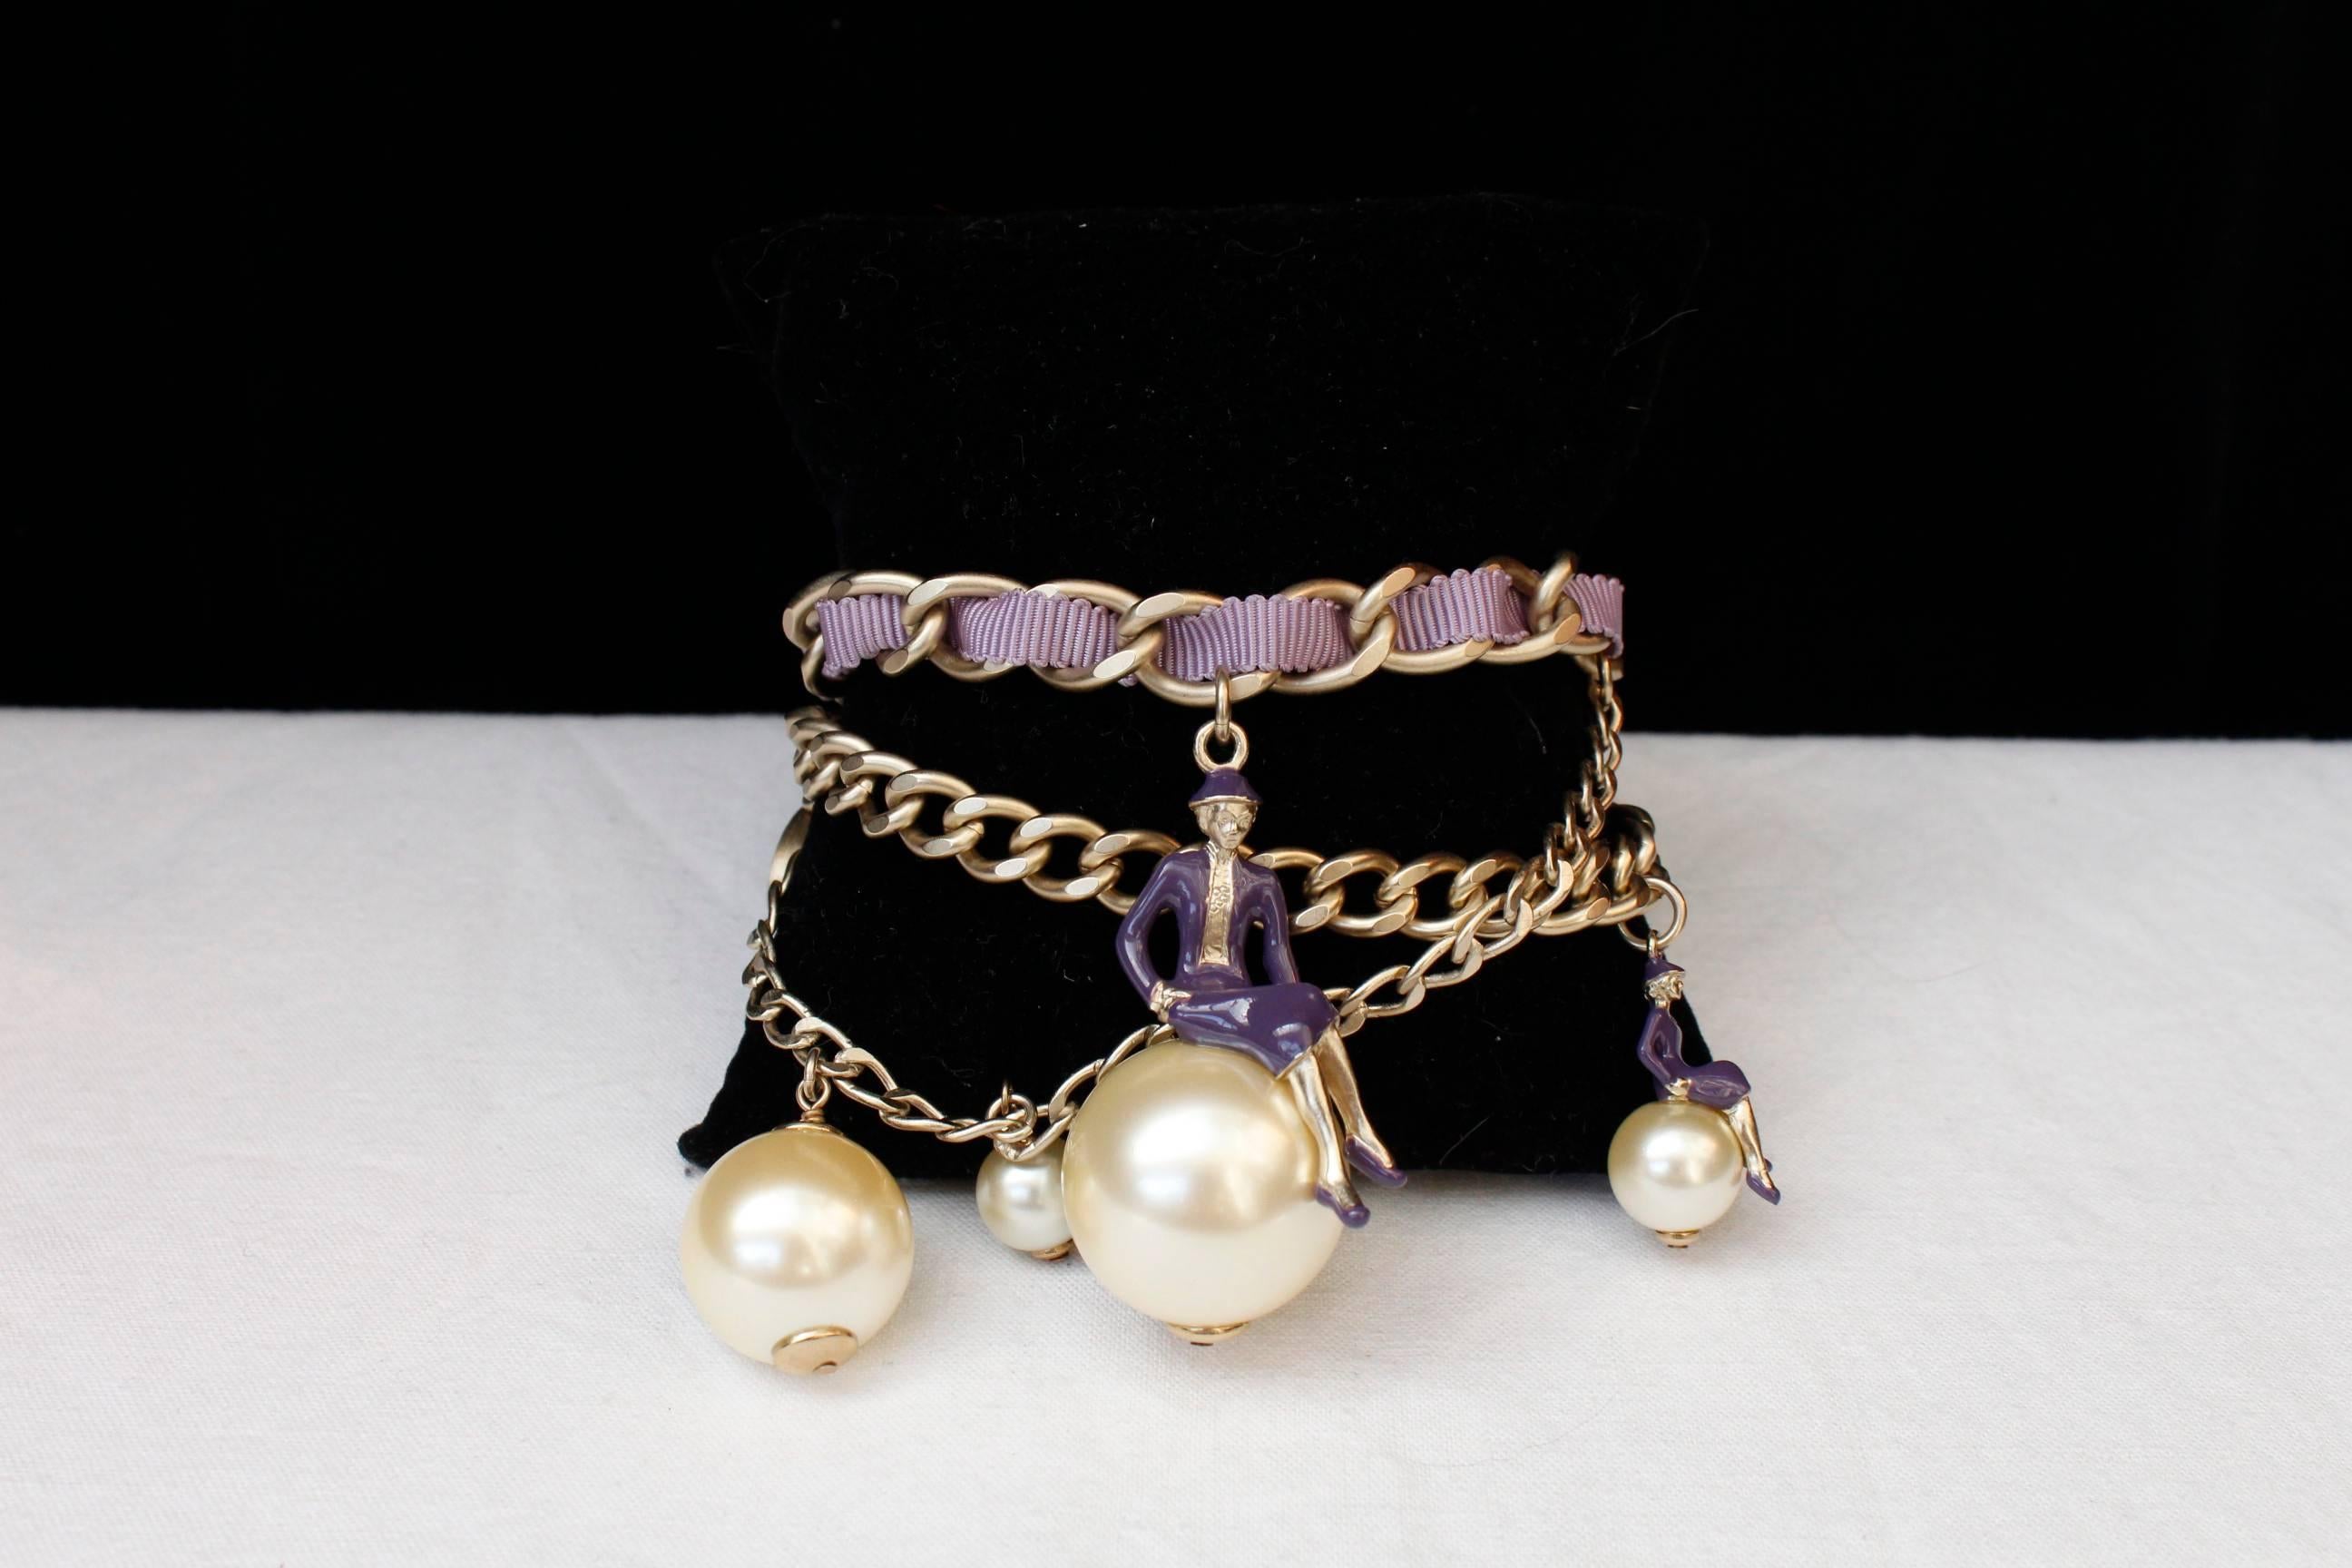 CHANEL (Made in France) Bracelet composed of three strands of curb chain in light gold gilded metal, embellished with purple tweed, faux-pearls, small CC logos in enamelled purple color and two figurines representing Coco Chanel sitting on a bead.